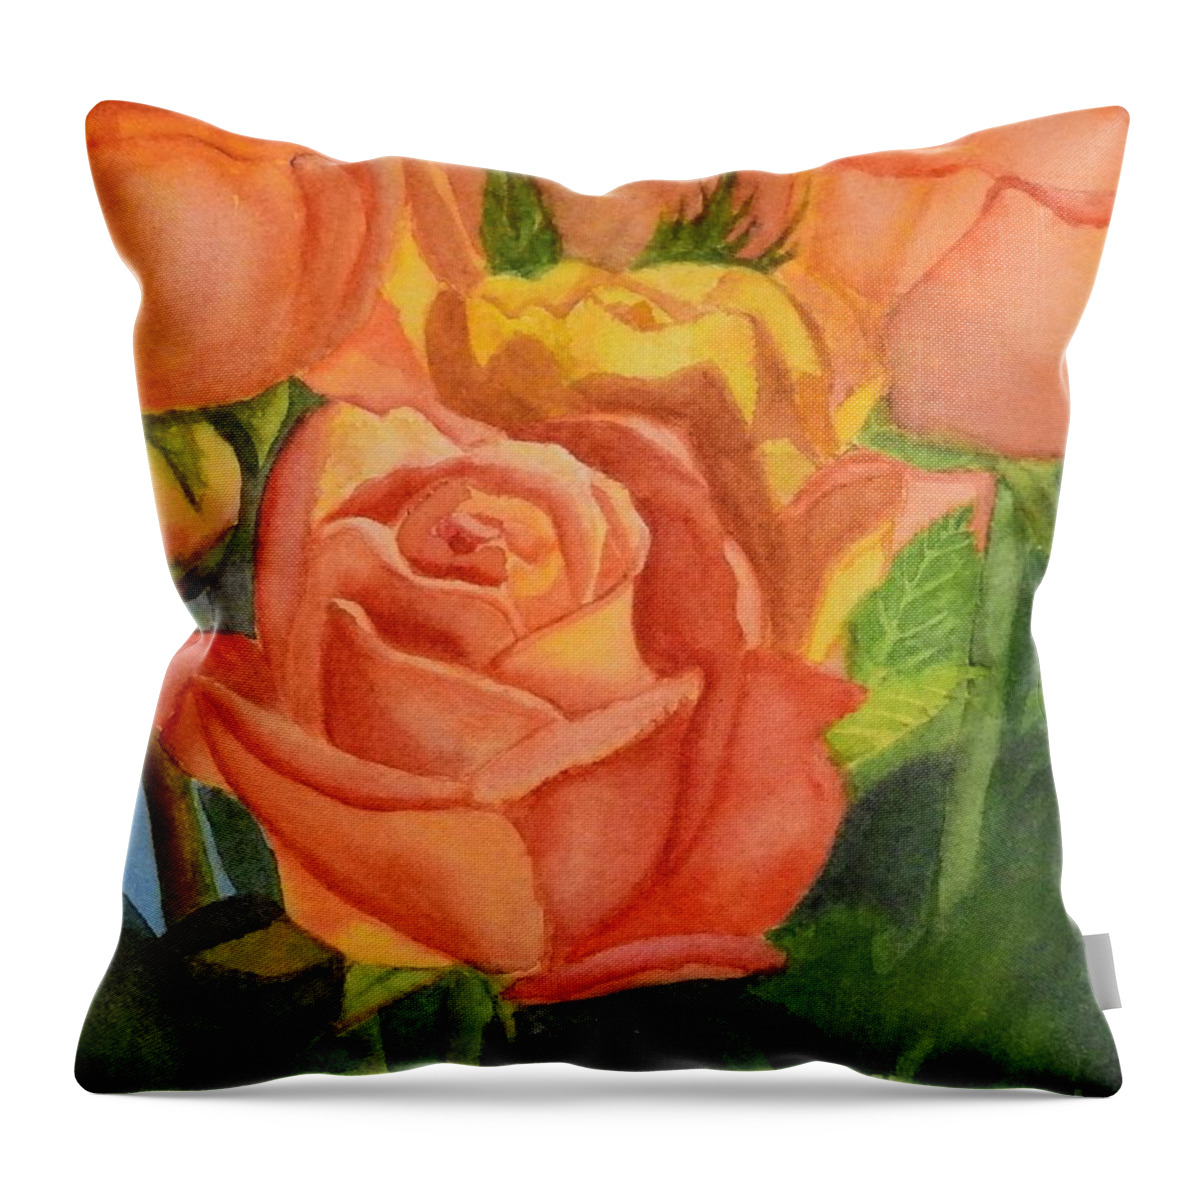 Rose Throw Pillow featuring the painting Rose by Petra Burgmann